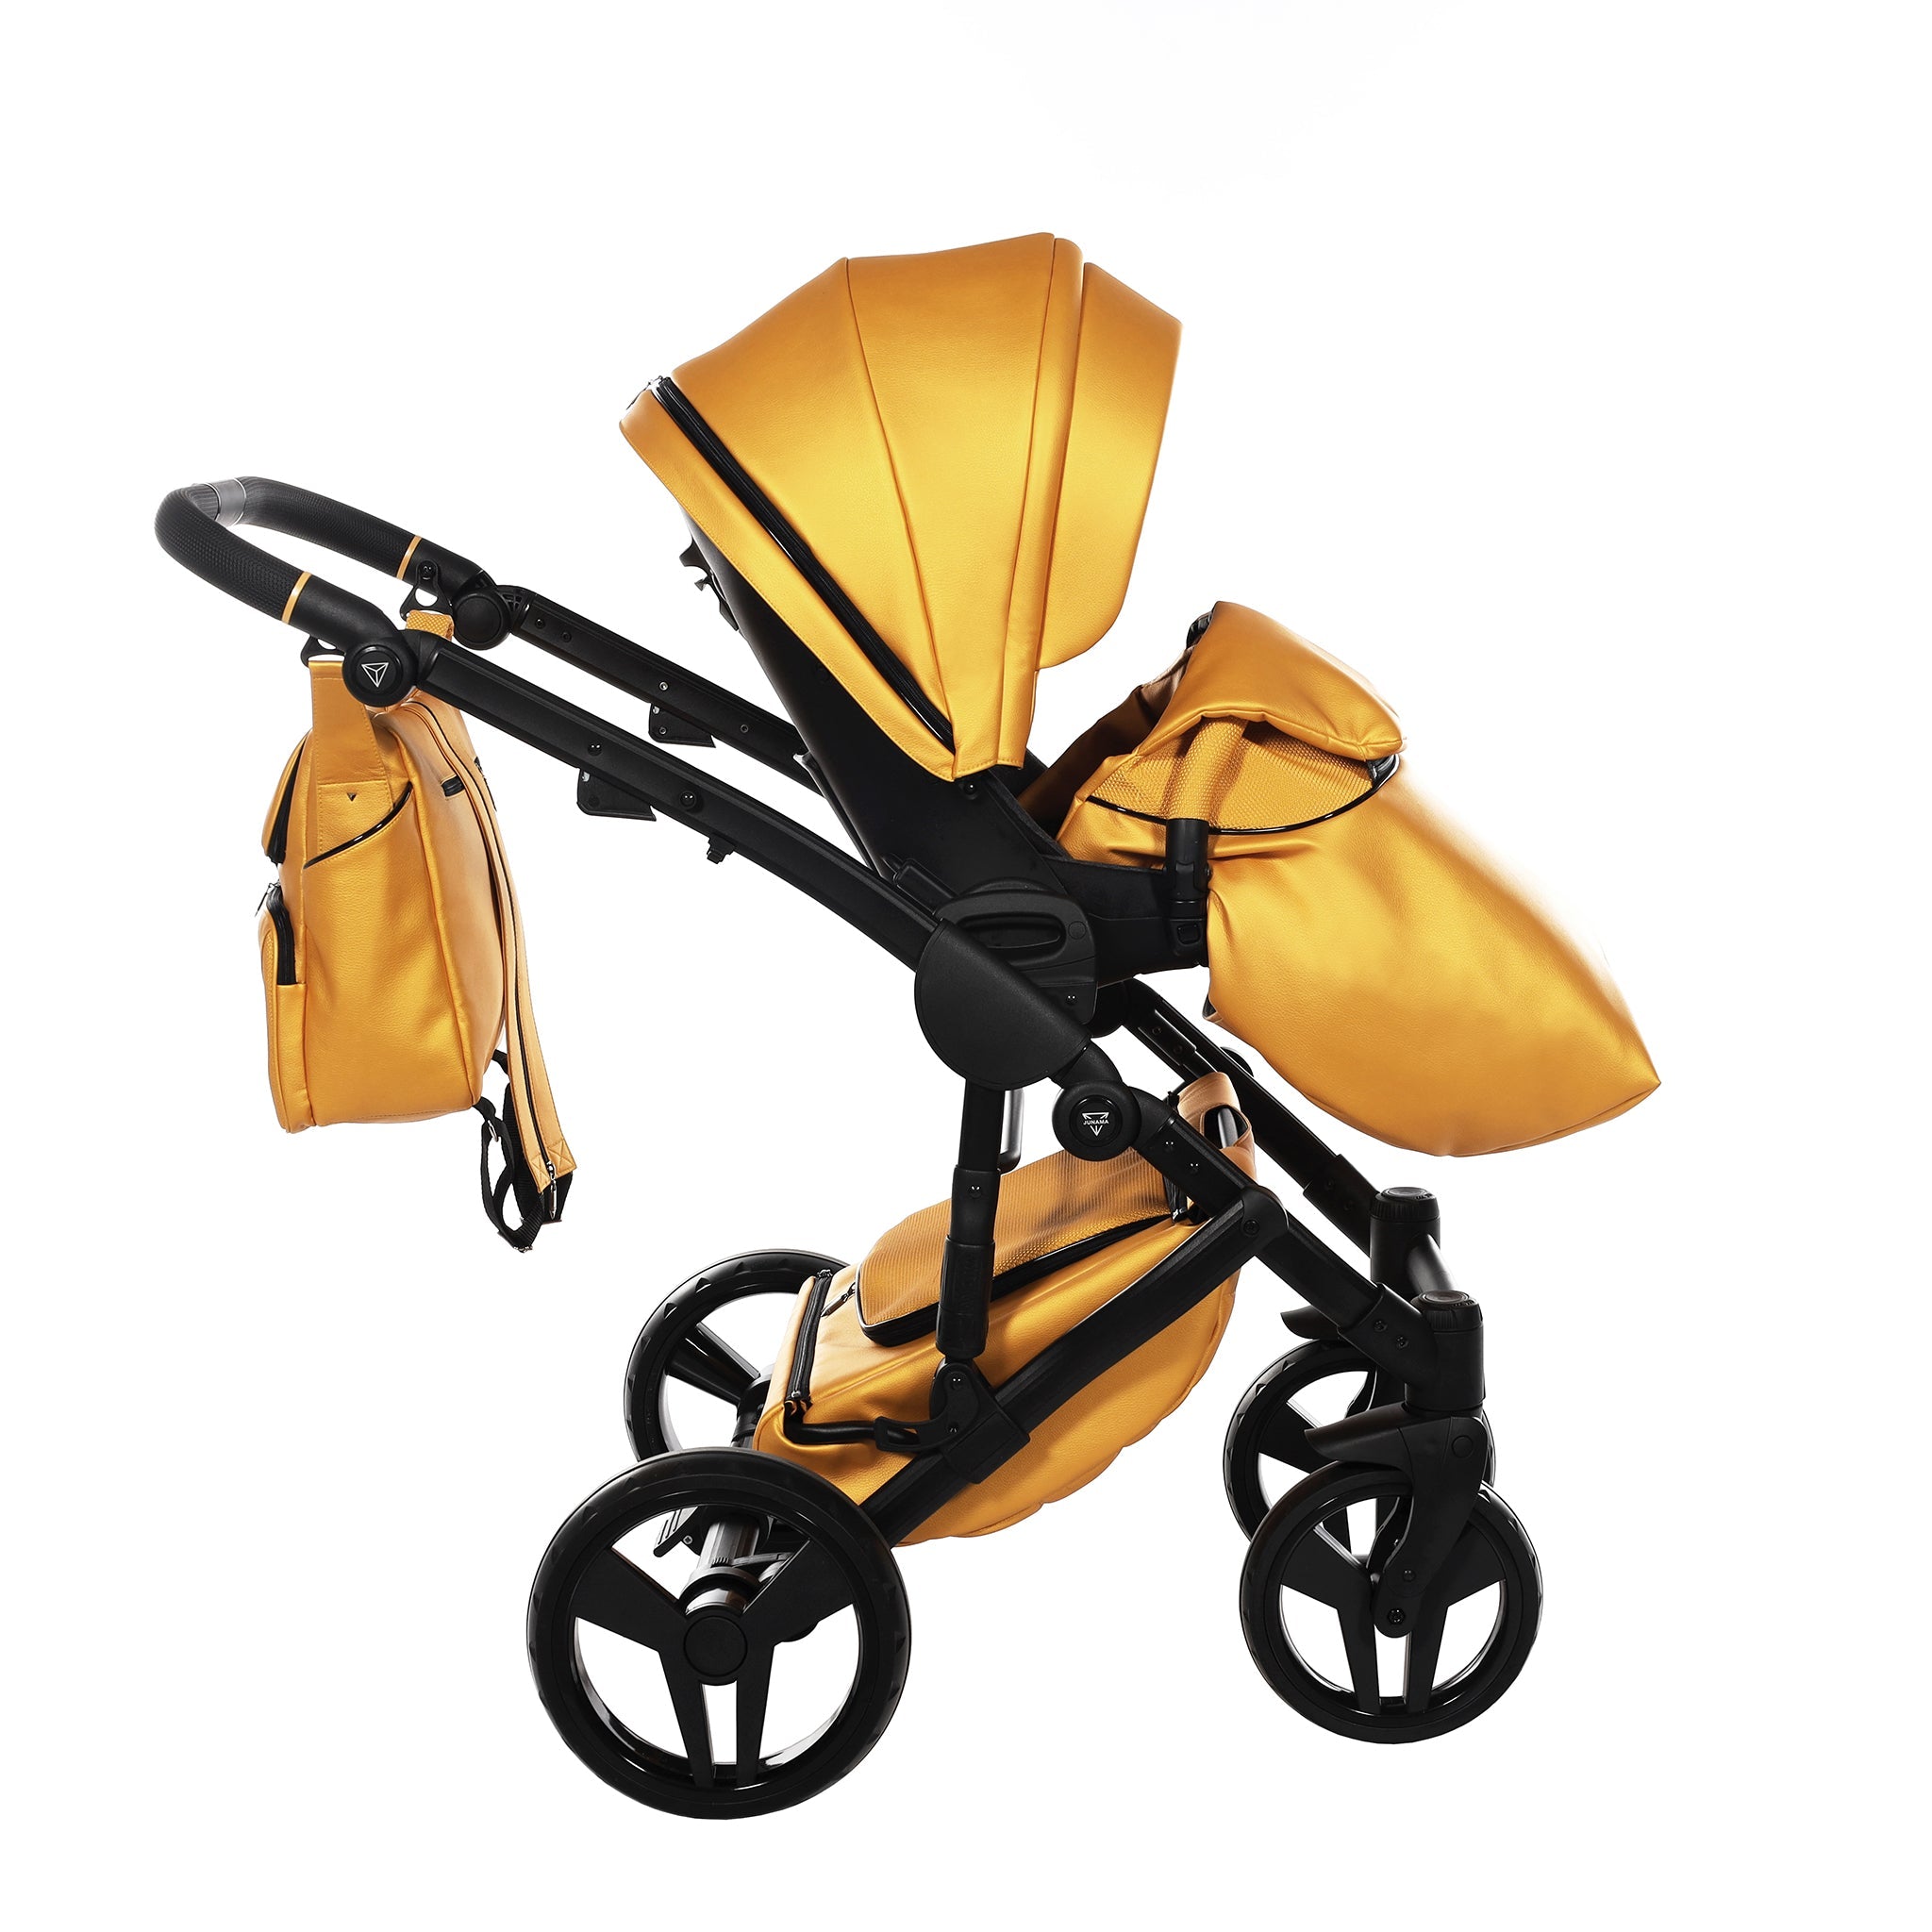 Junama S Class, baby prams or stroller 2 in 1 - Yellow and Black, Code number: JUNSC03